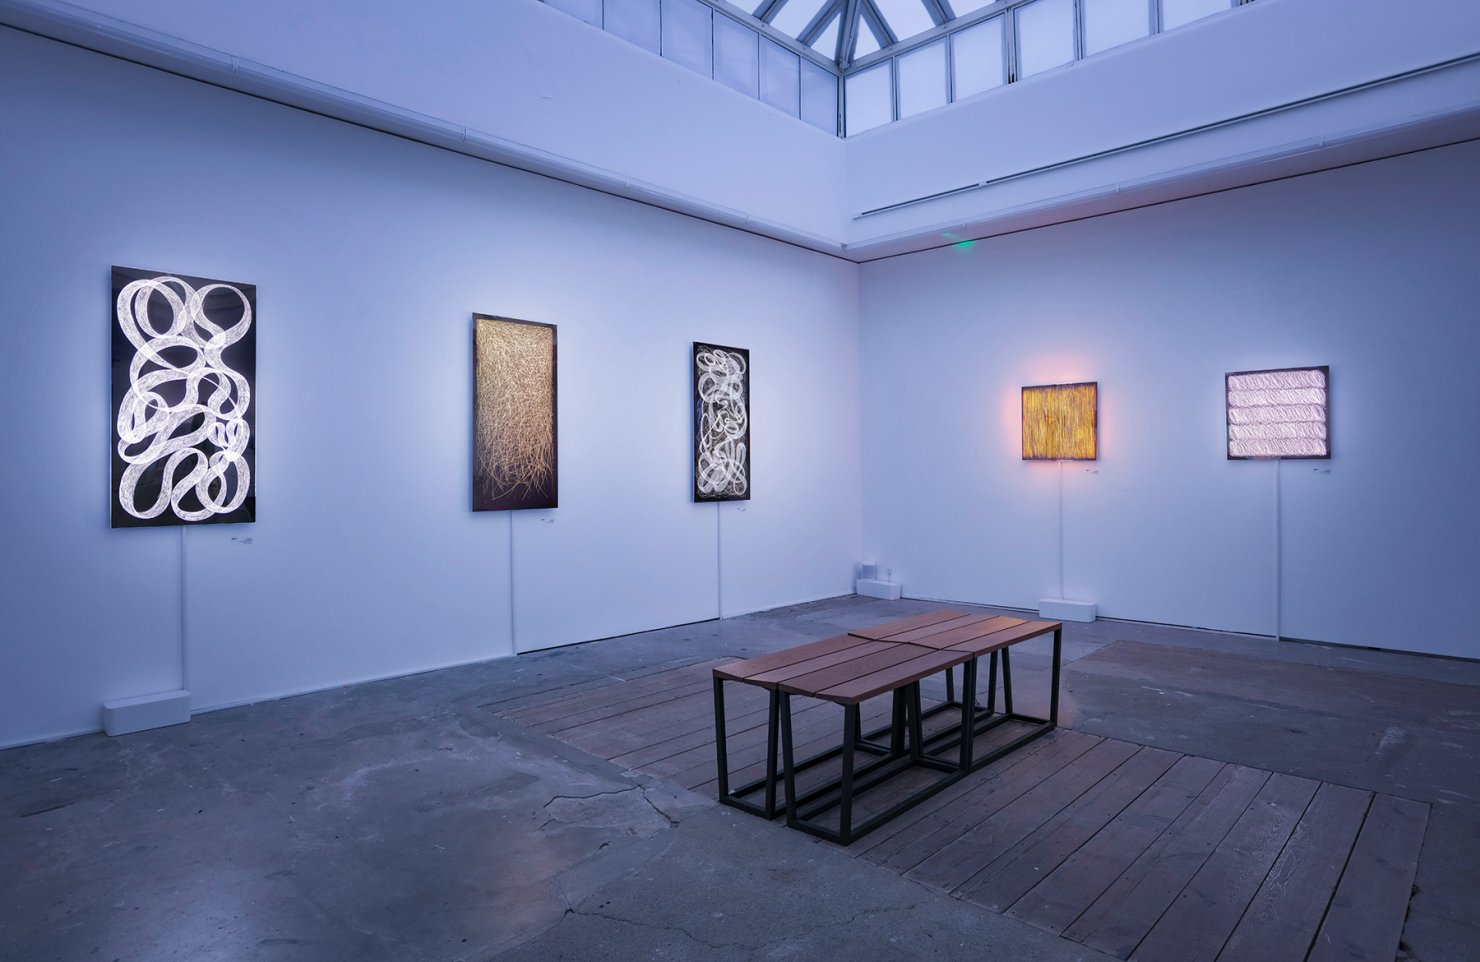 Installation image for Jinseon Chon: Looking Glass World, at Pontone Gallery